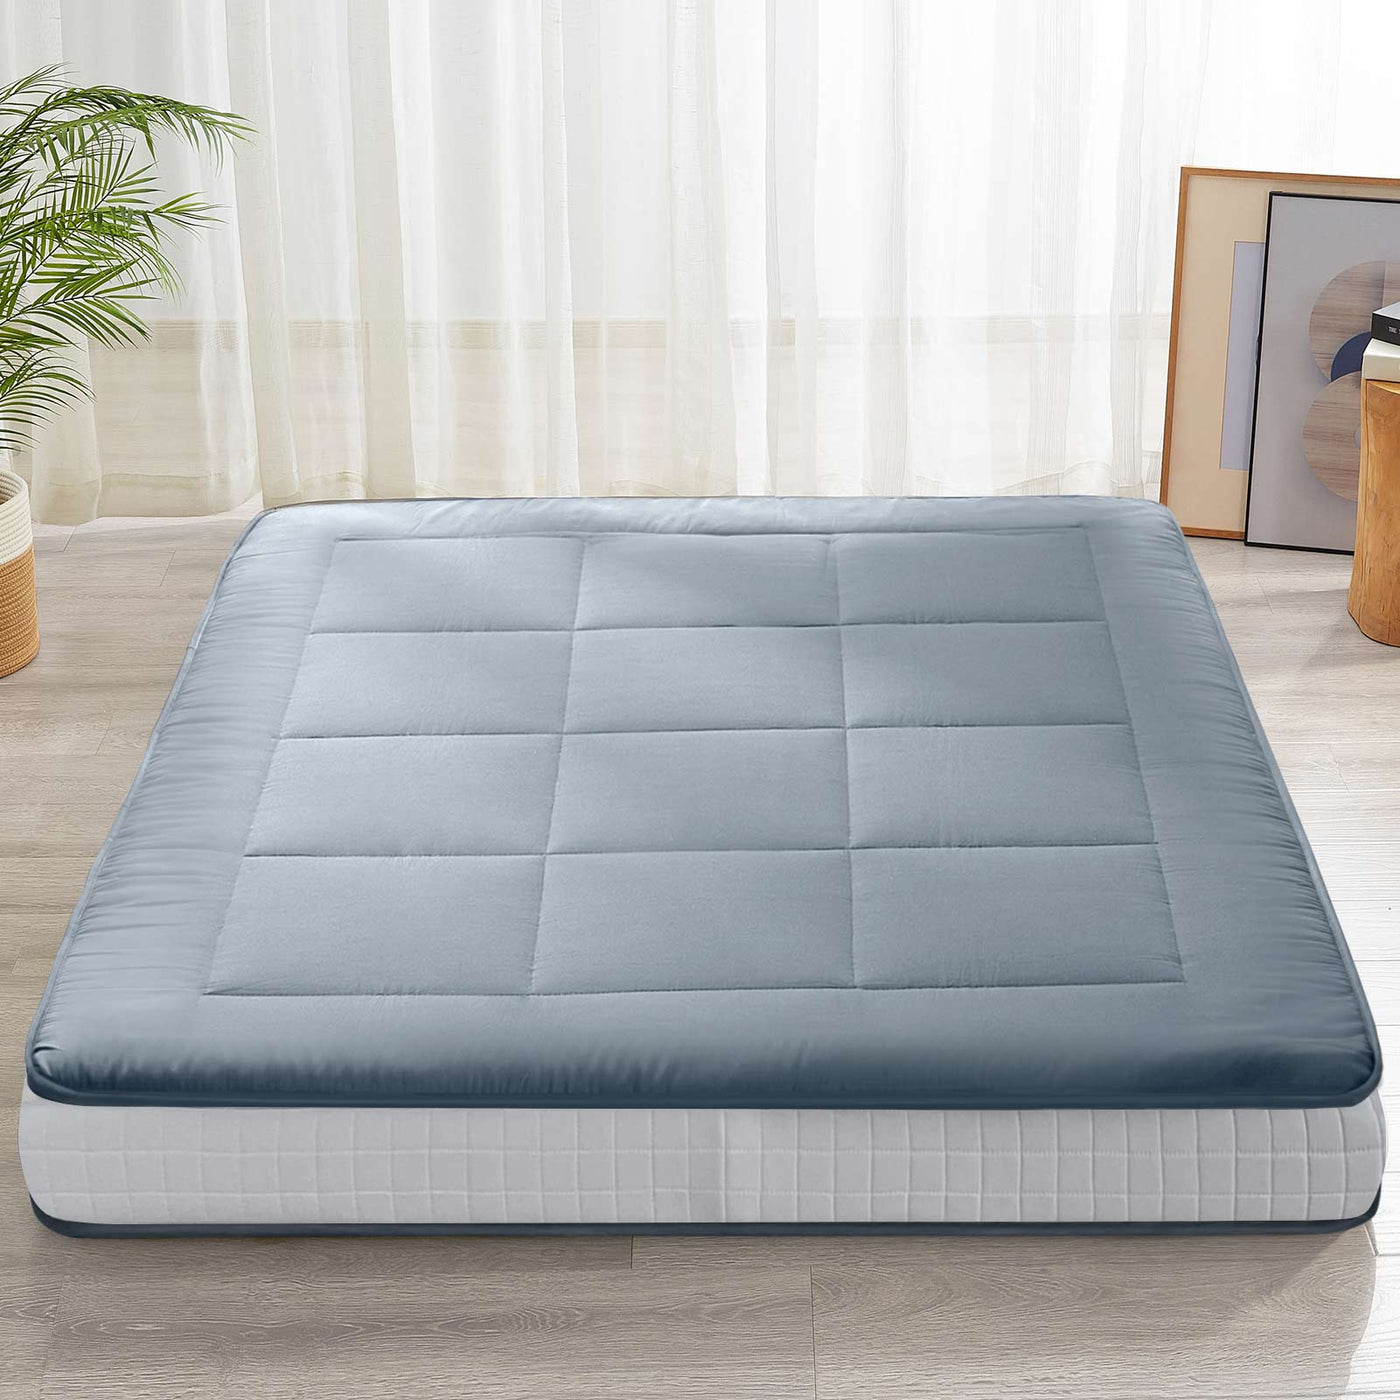 MAXYOYO 6" Extra Thick Floor Futon Mattress, Square Quilting Japanese Futon Bed, Blue Gray